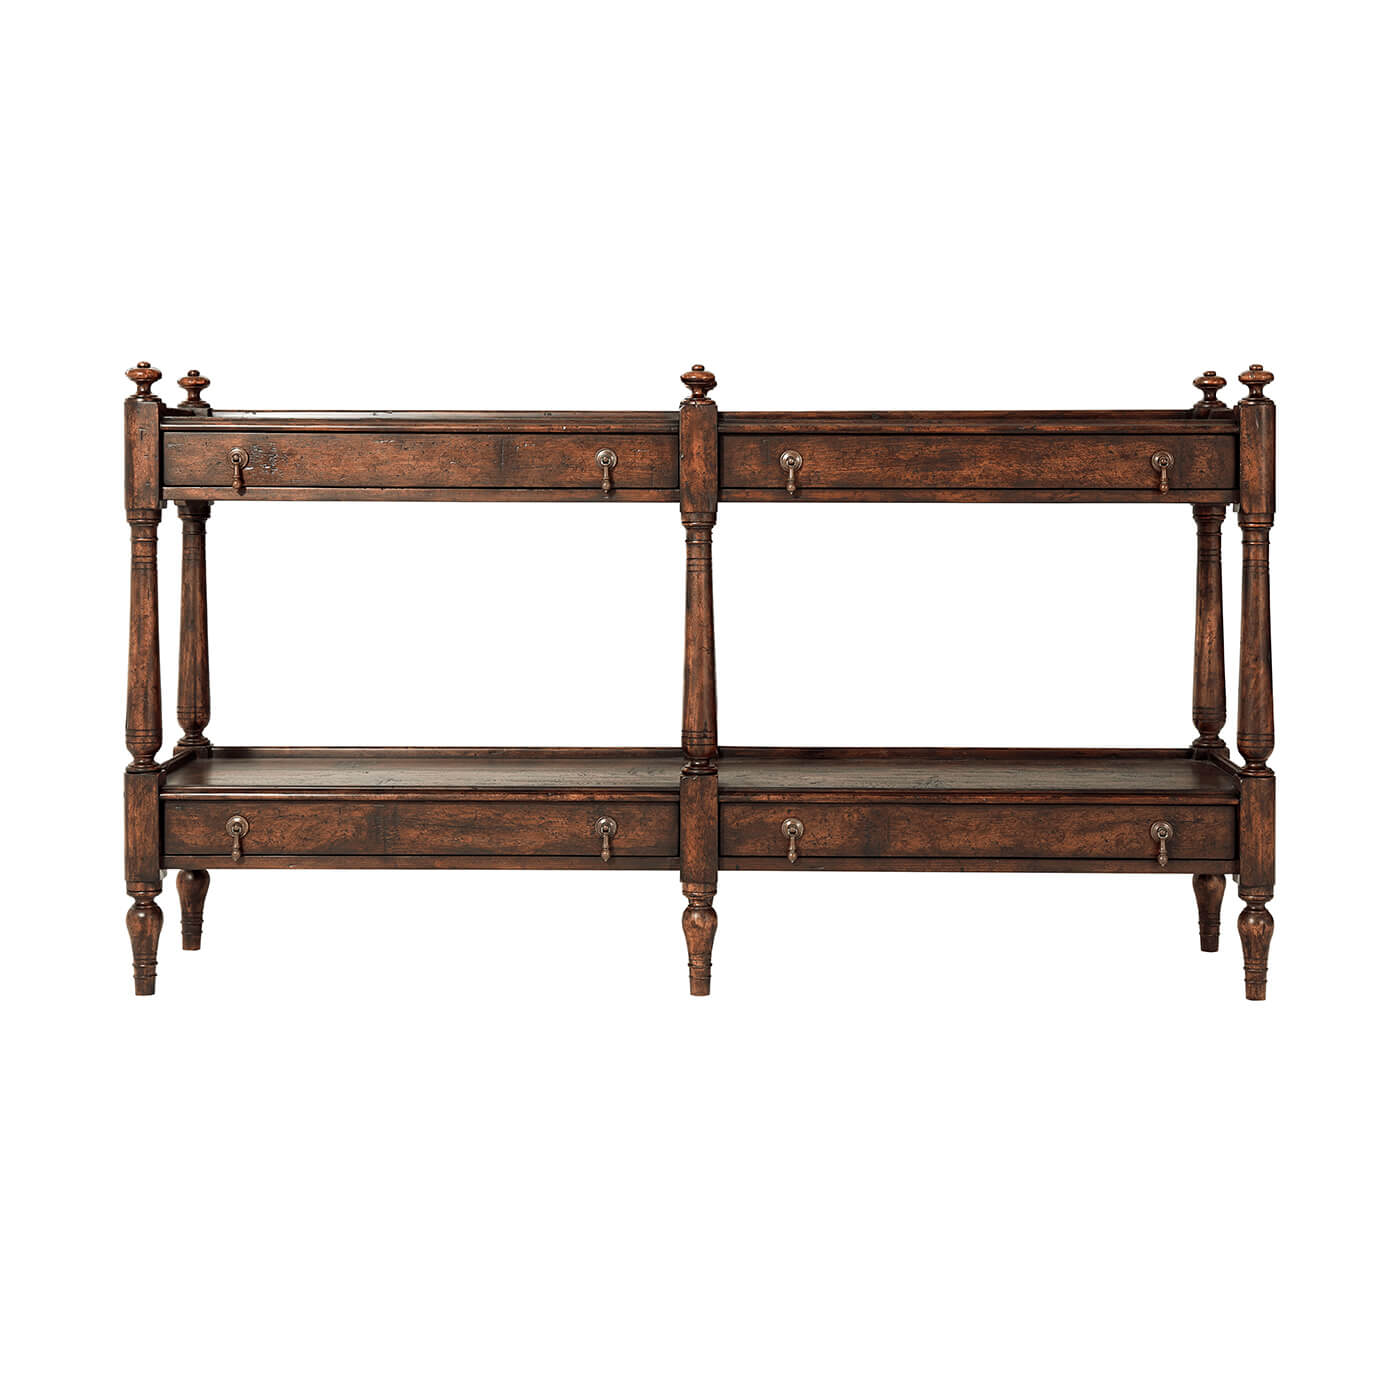 Regency Style Antiqued Console Table - English Georgian America